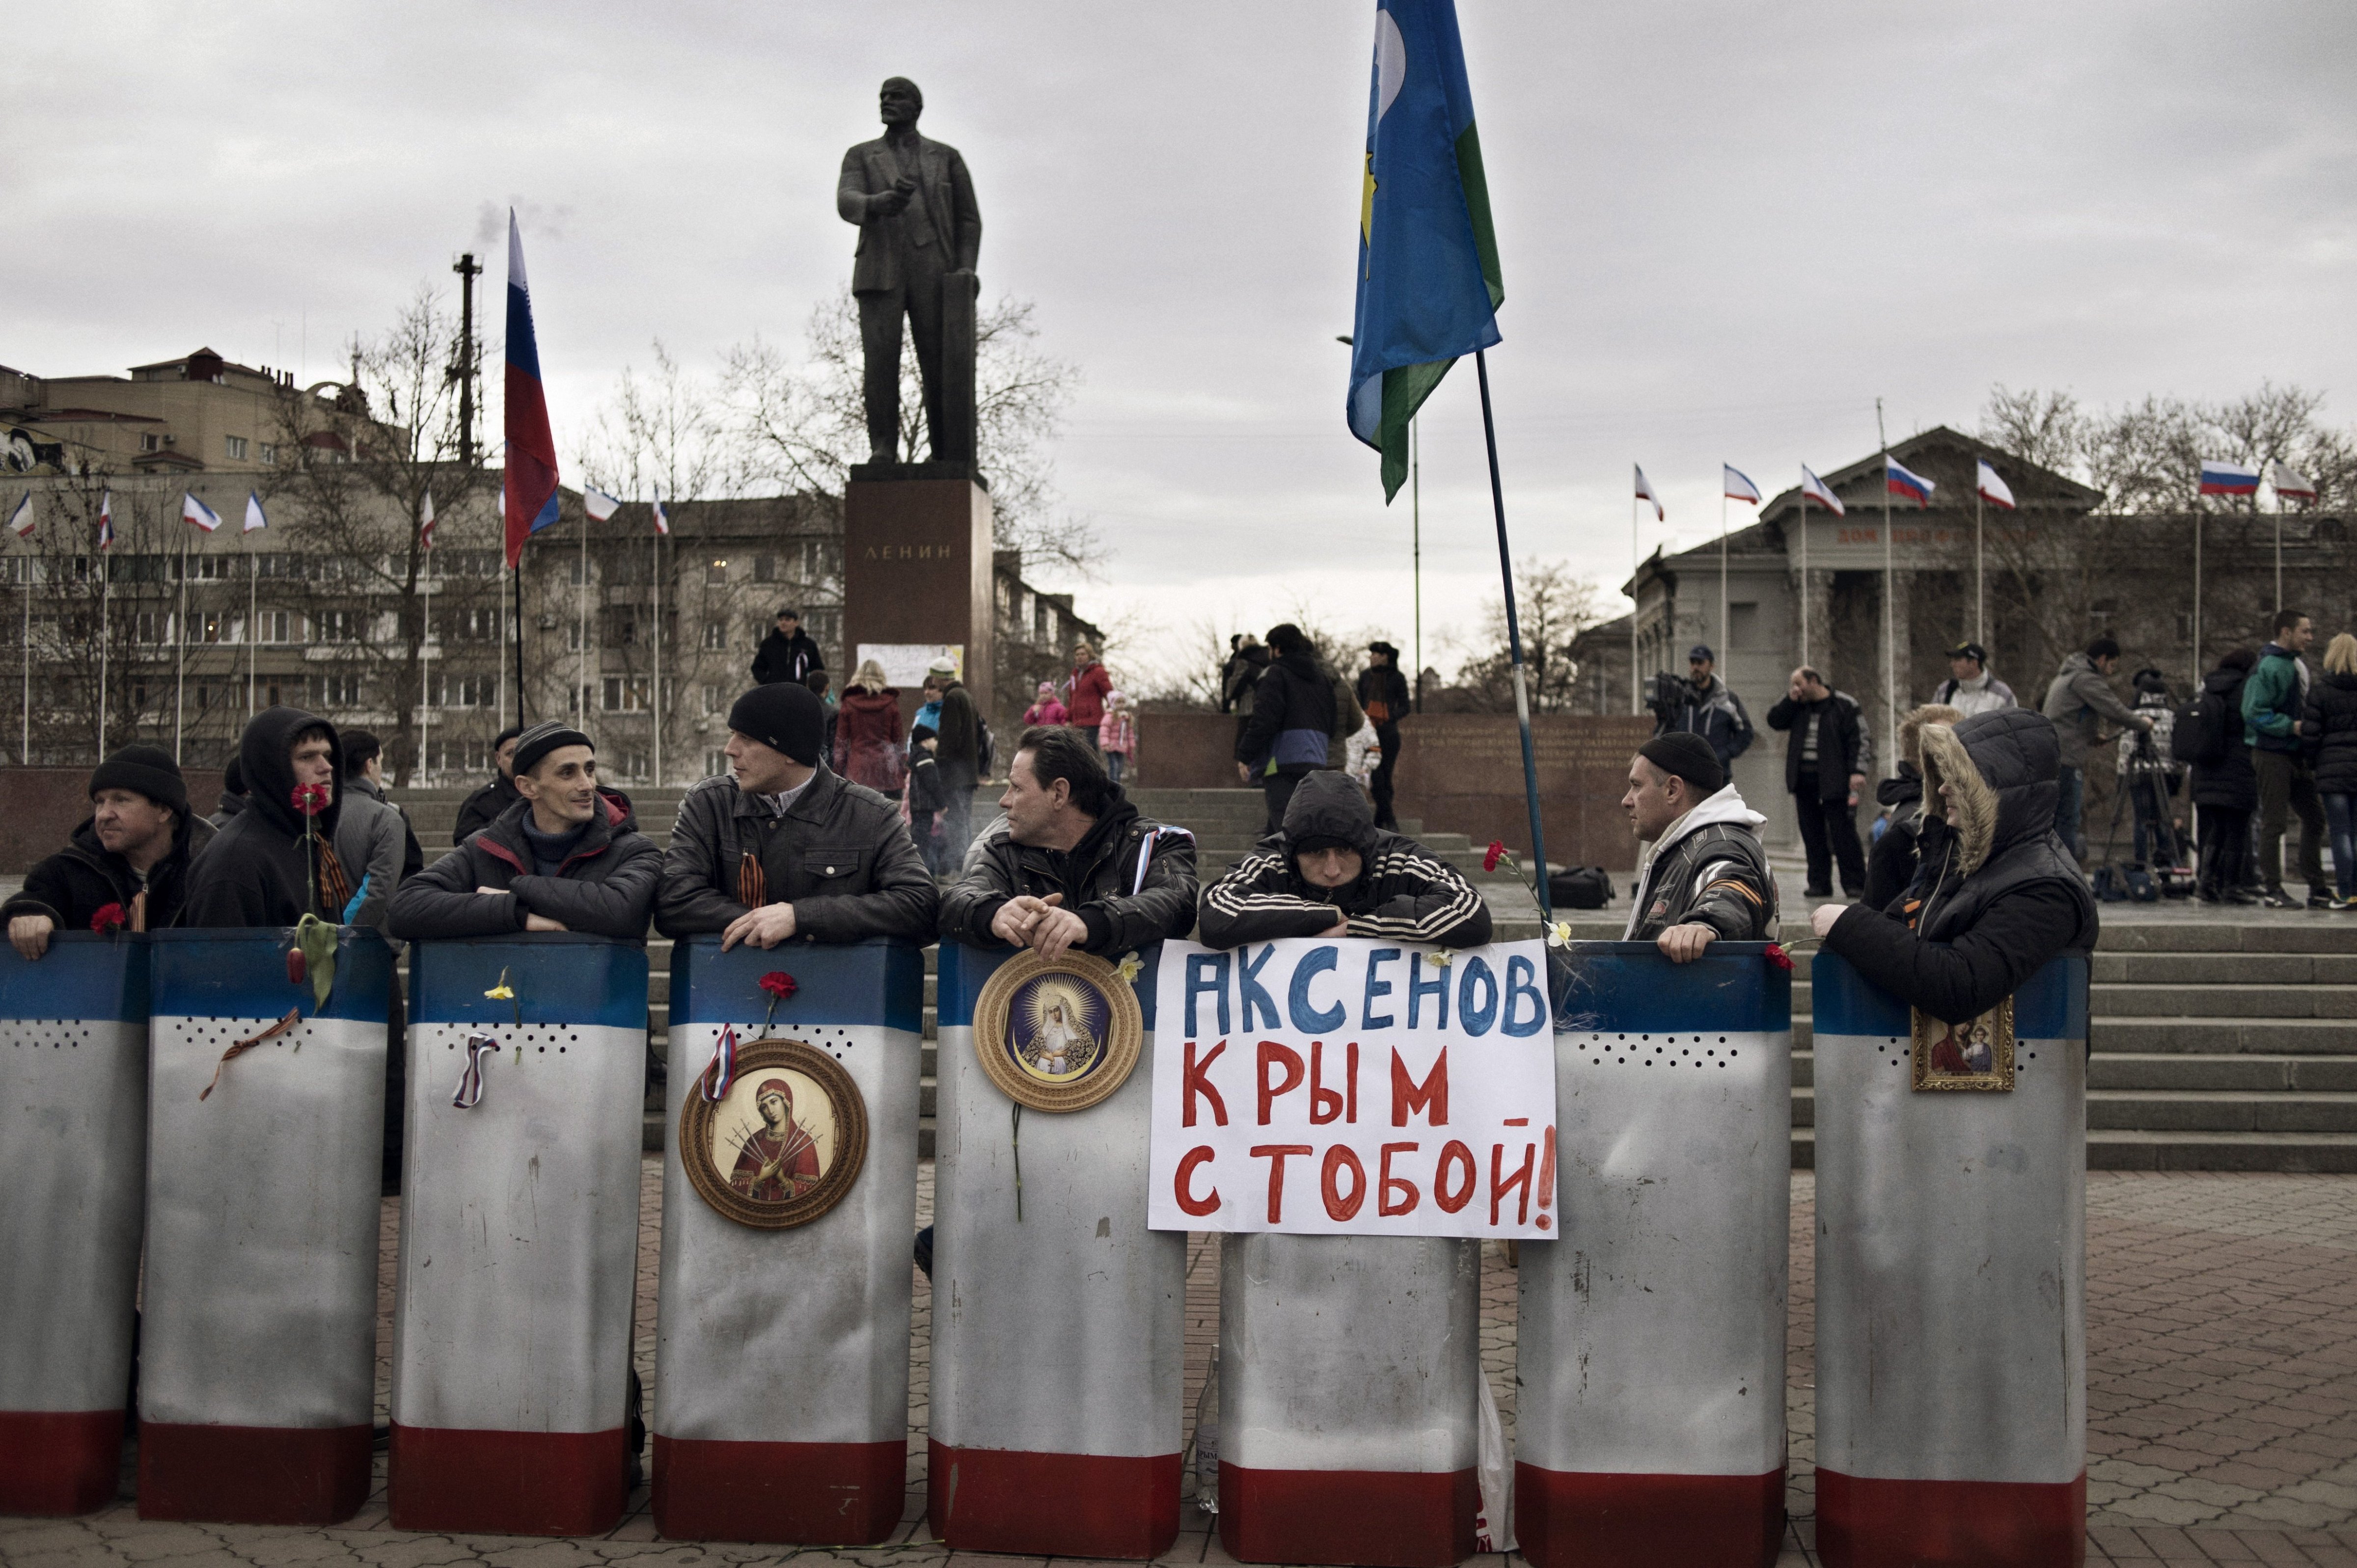 Members of a pro-Russian group stationed themselves in front of government buildings and a statue of Lenin in Simferopol on Sunday. (Yuri Kozyrev—Noor for TIME)